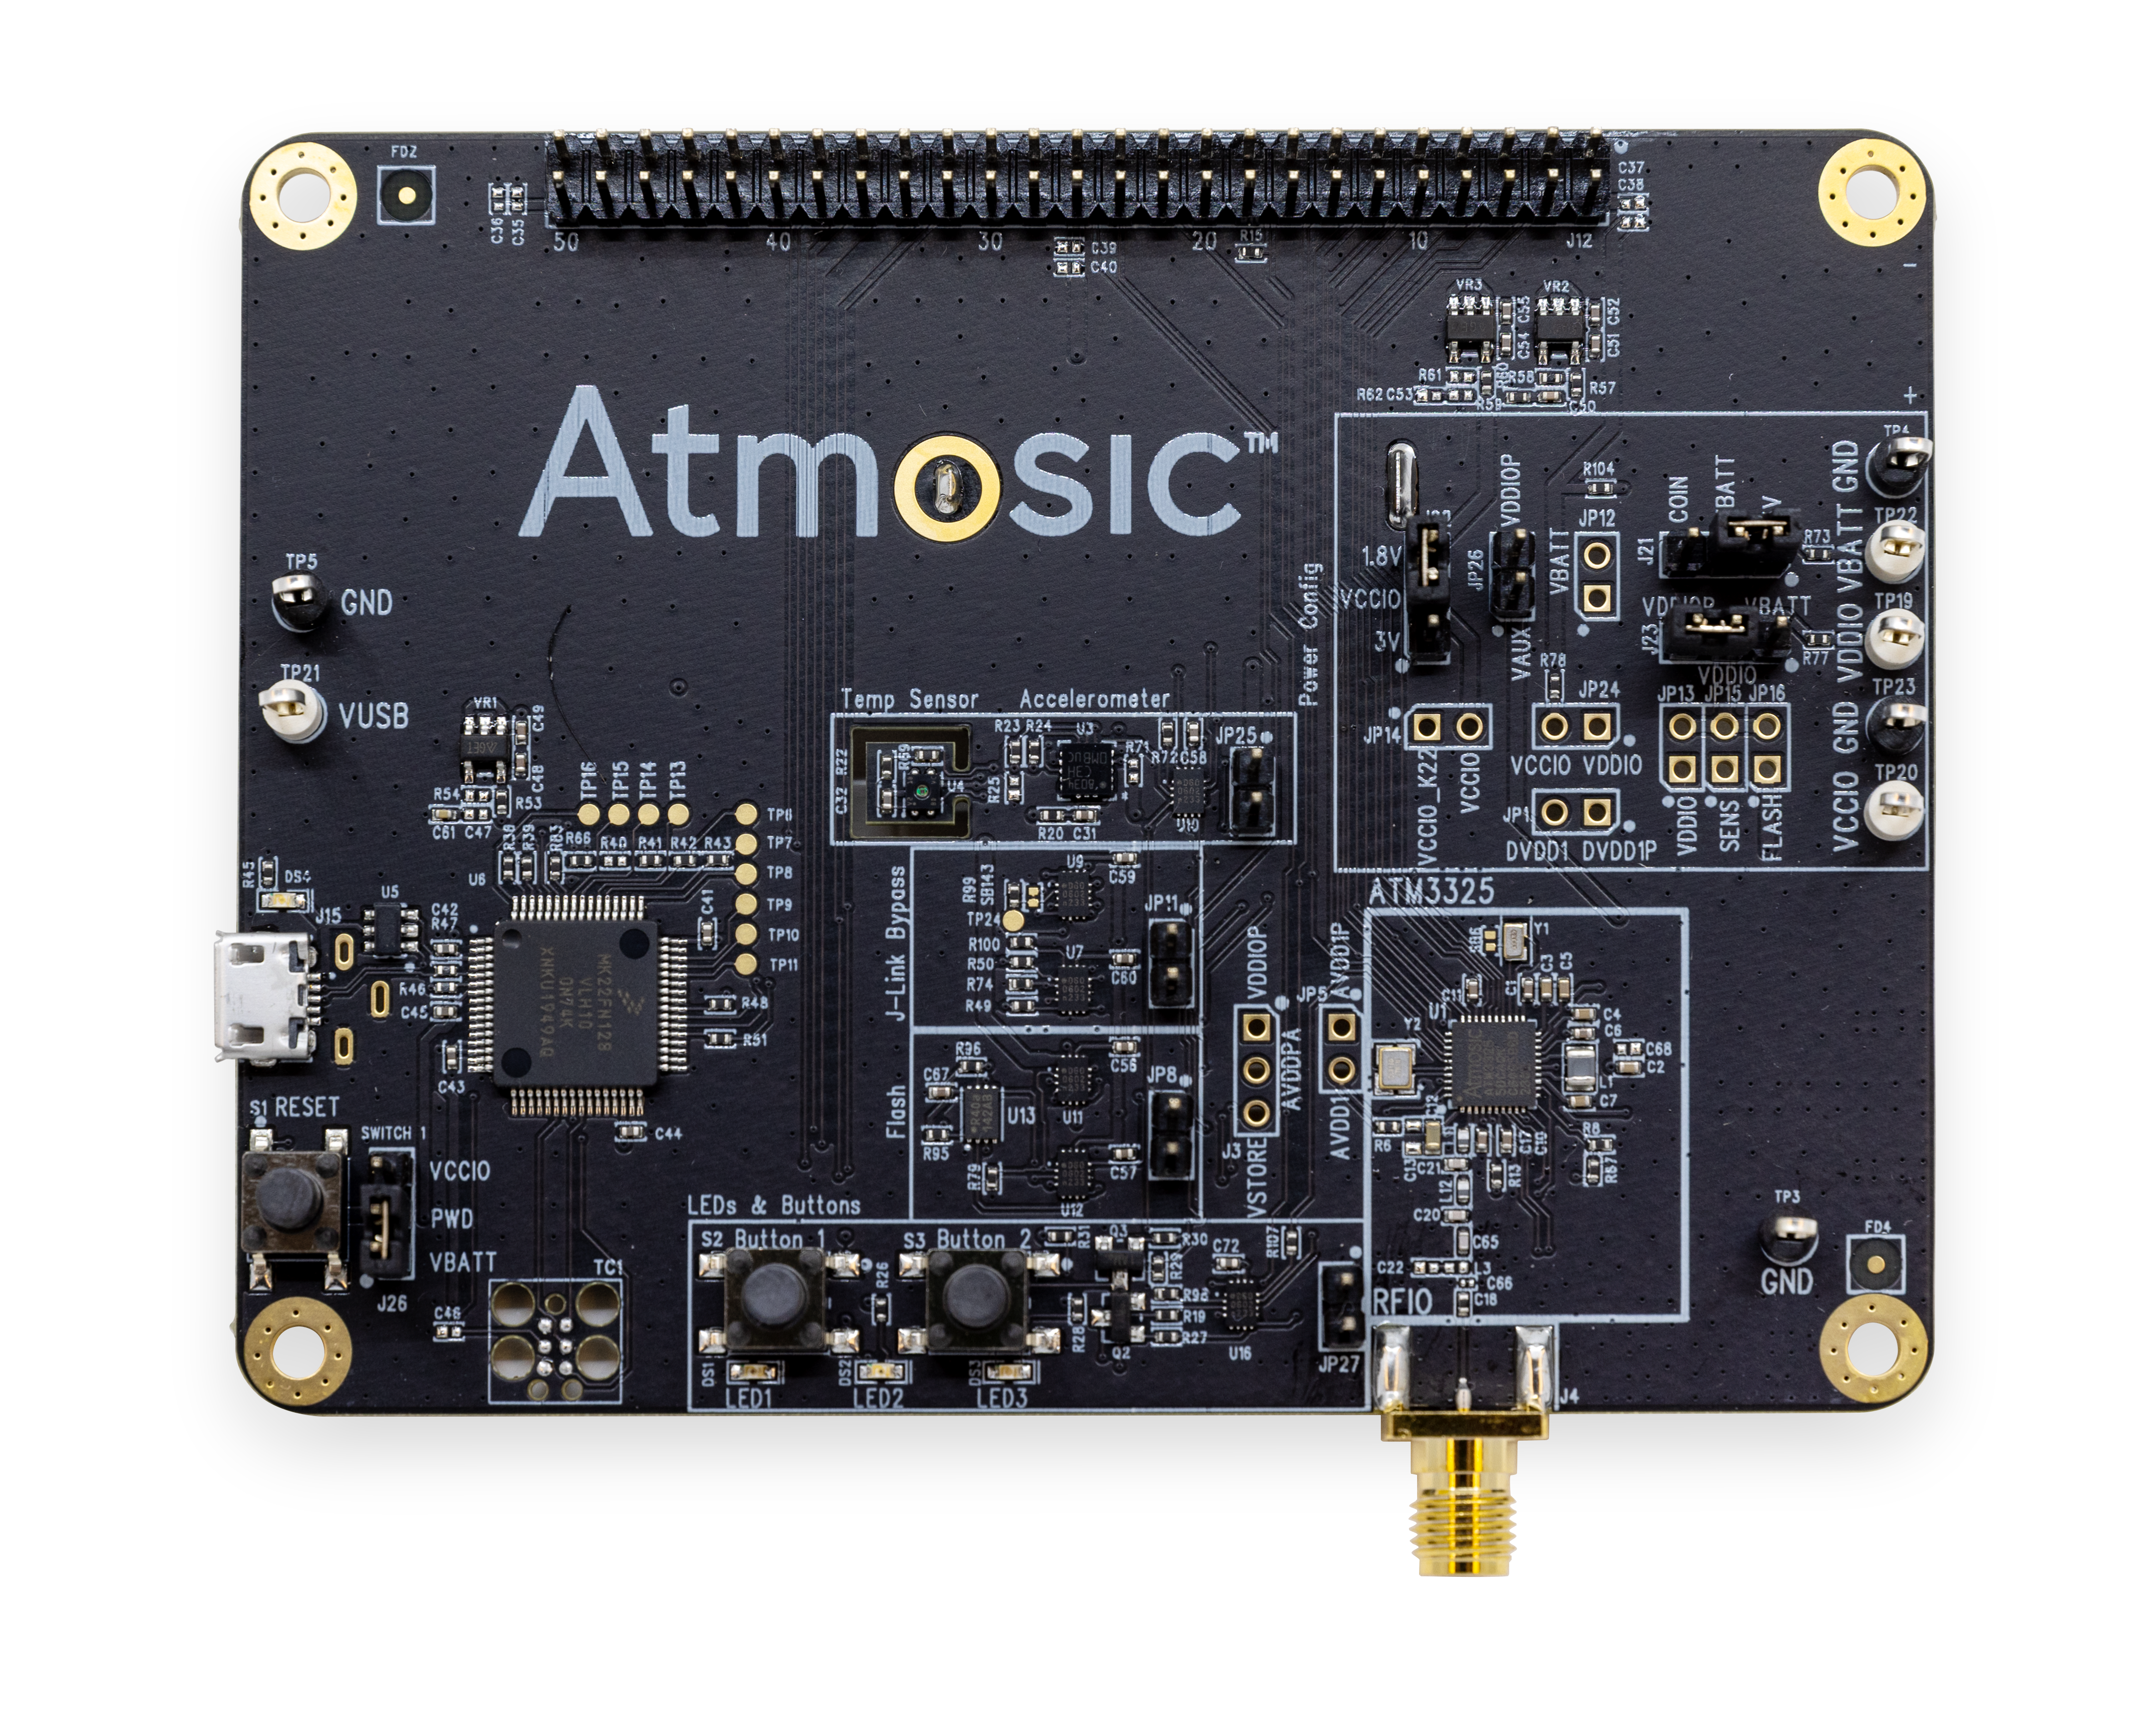 ATMEVK_3325_QK_front_cleaned_high-res (v3 board)